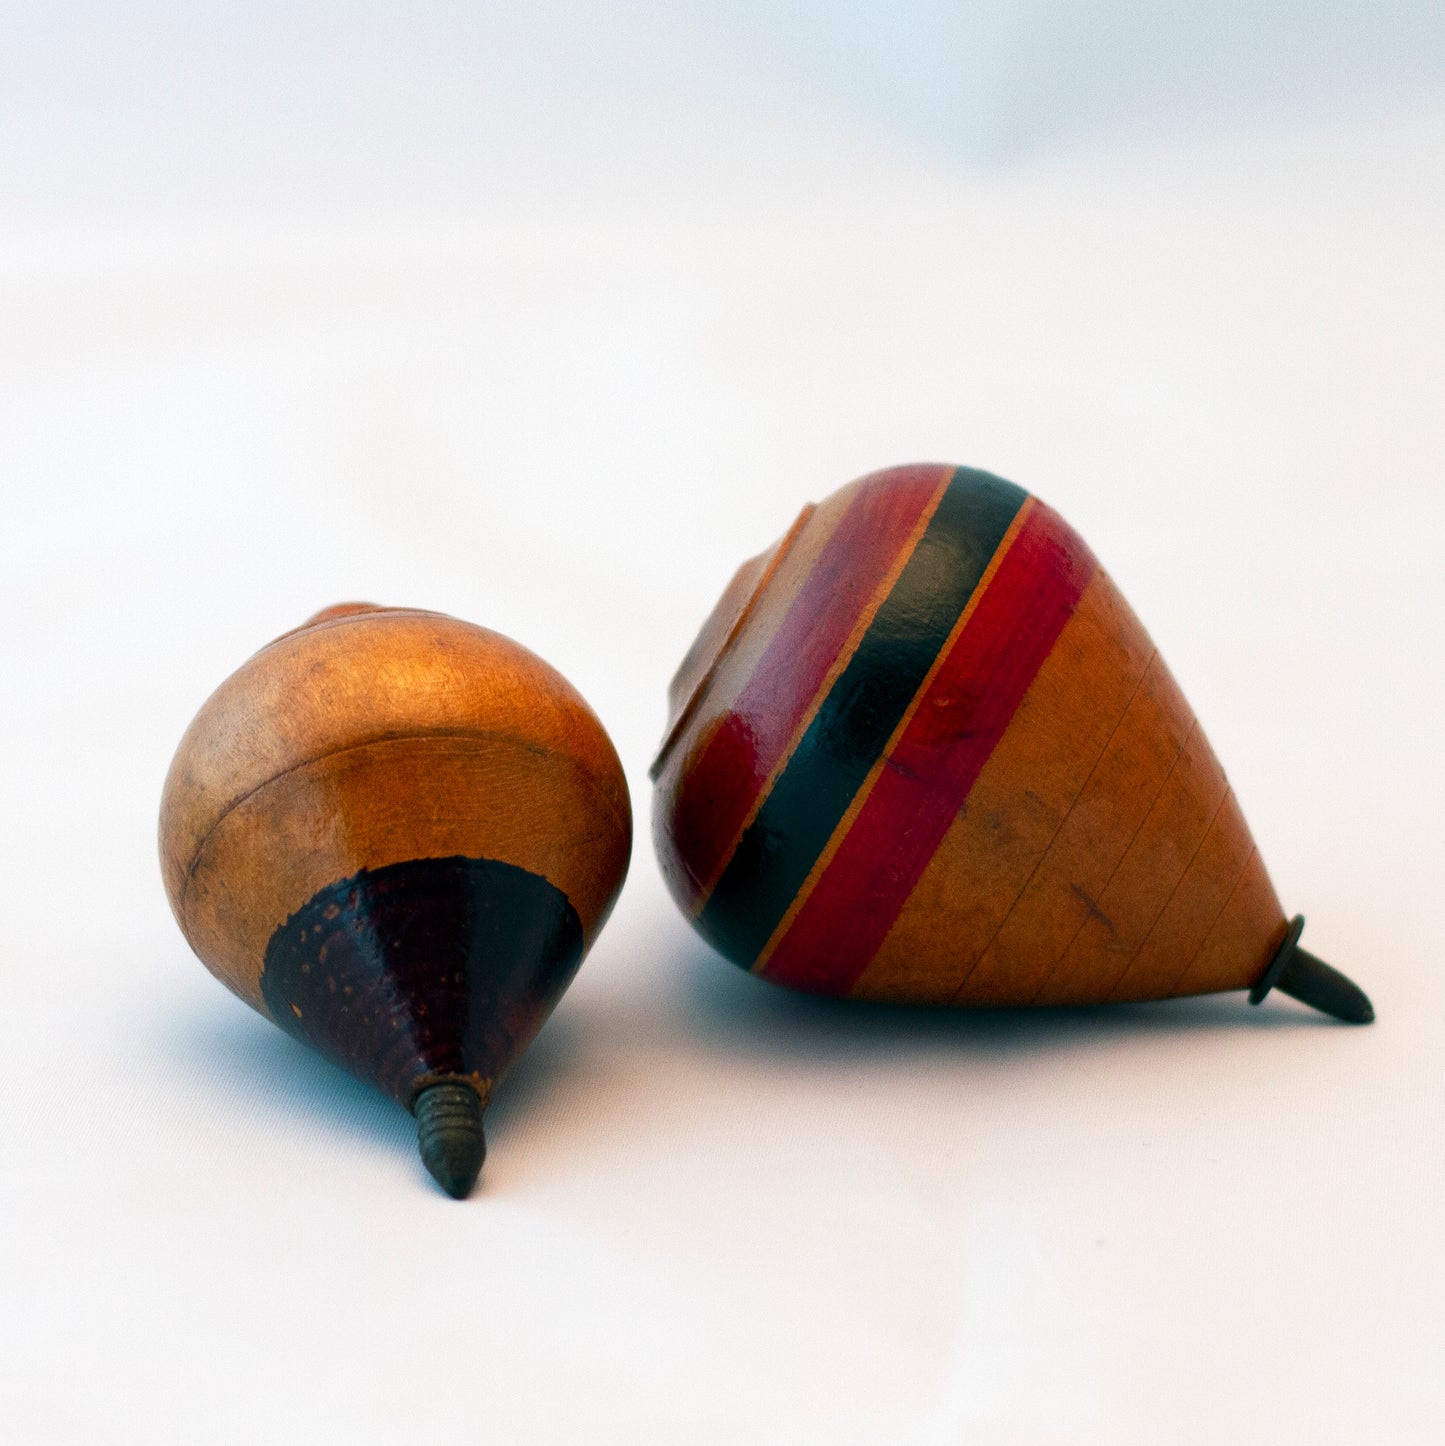 HAND PAINTED WOOD SPINNING TOPS Set of Two Circa 1930s to 1940s